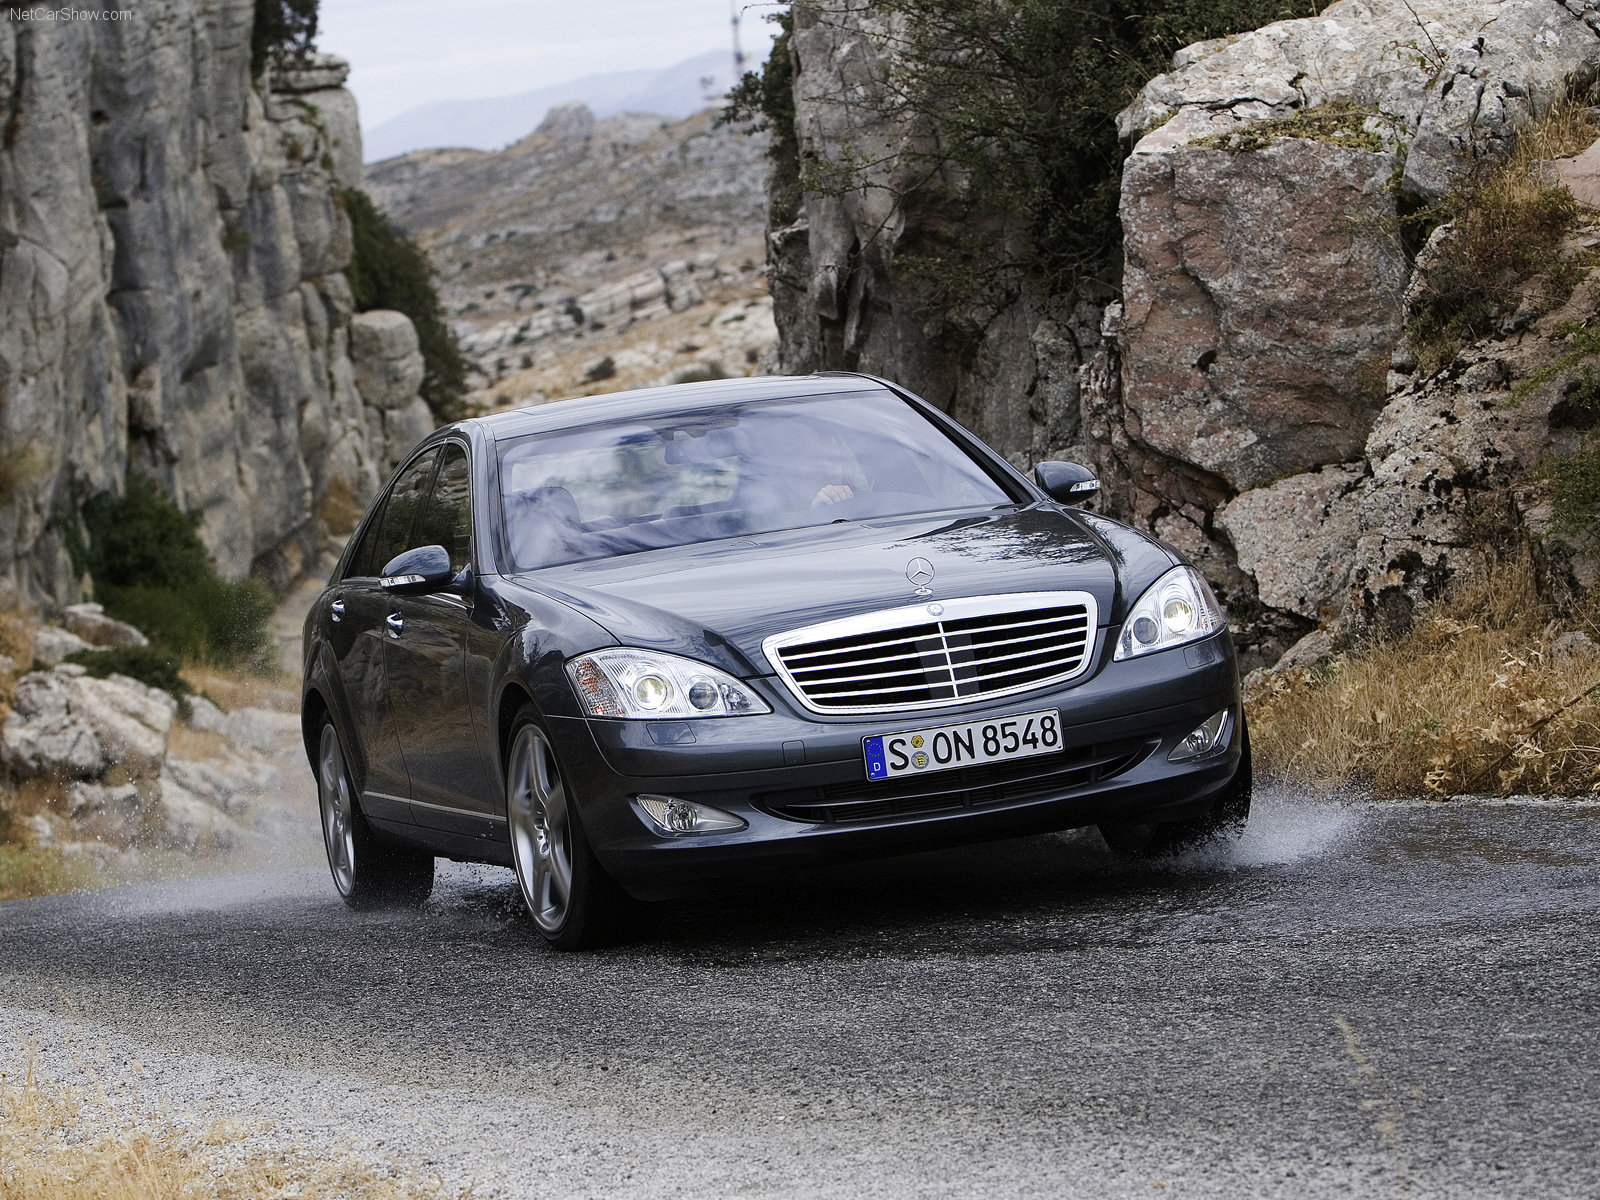 Mercedes Benz S Class W221 Picture. Mercedes Benz Photo Gallery